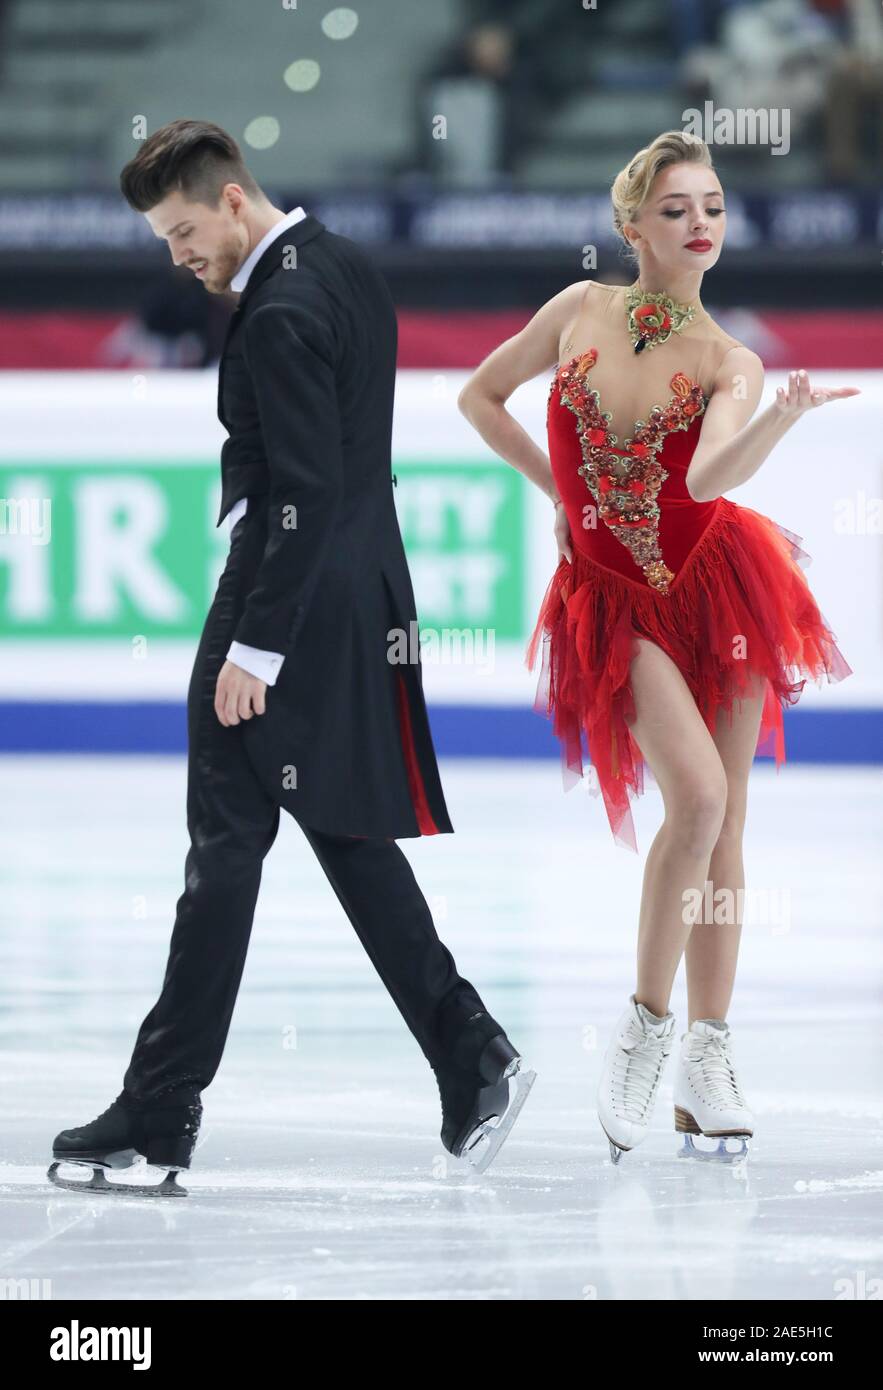 Turin, Italy. 6th Dec, 2019. Alexandra Stepanova (R)/Ivan Bukin of Russia  compete during the ice dance rhythm dance at the ISU Grand Prix of Figure  Skating Final 2019 in Turin, Italy, Dec.